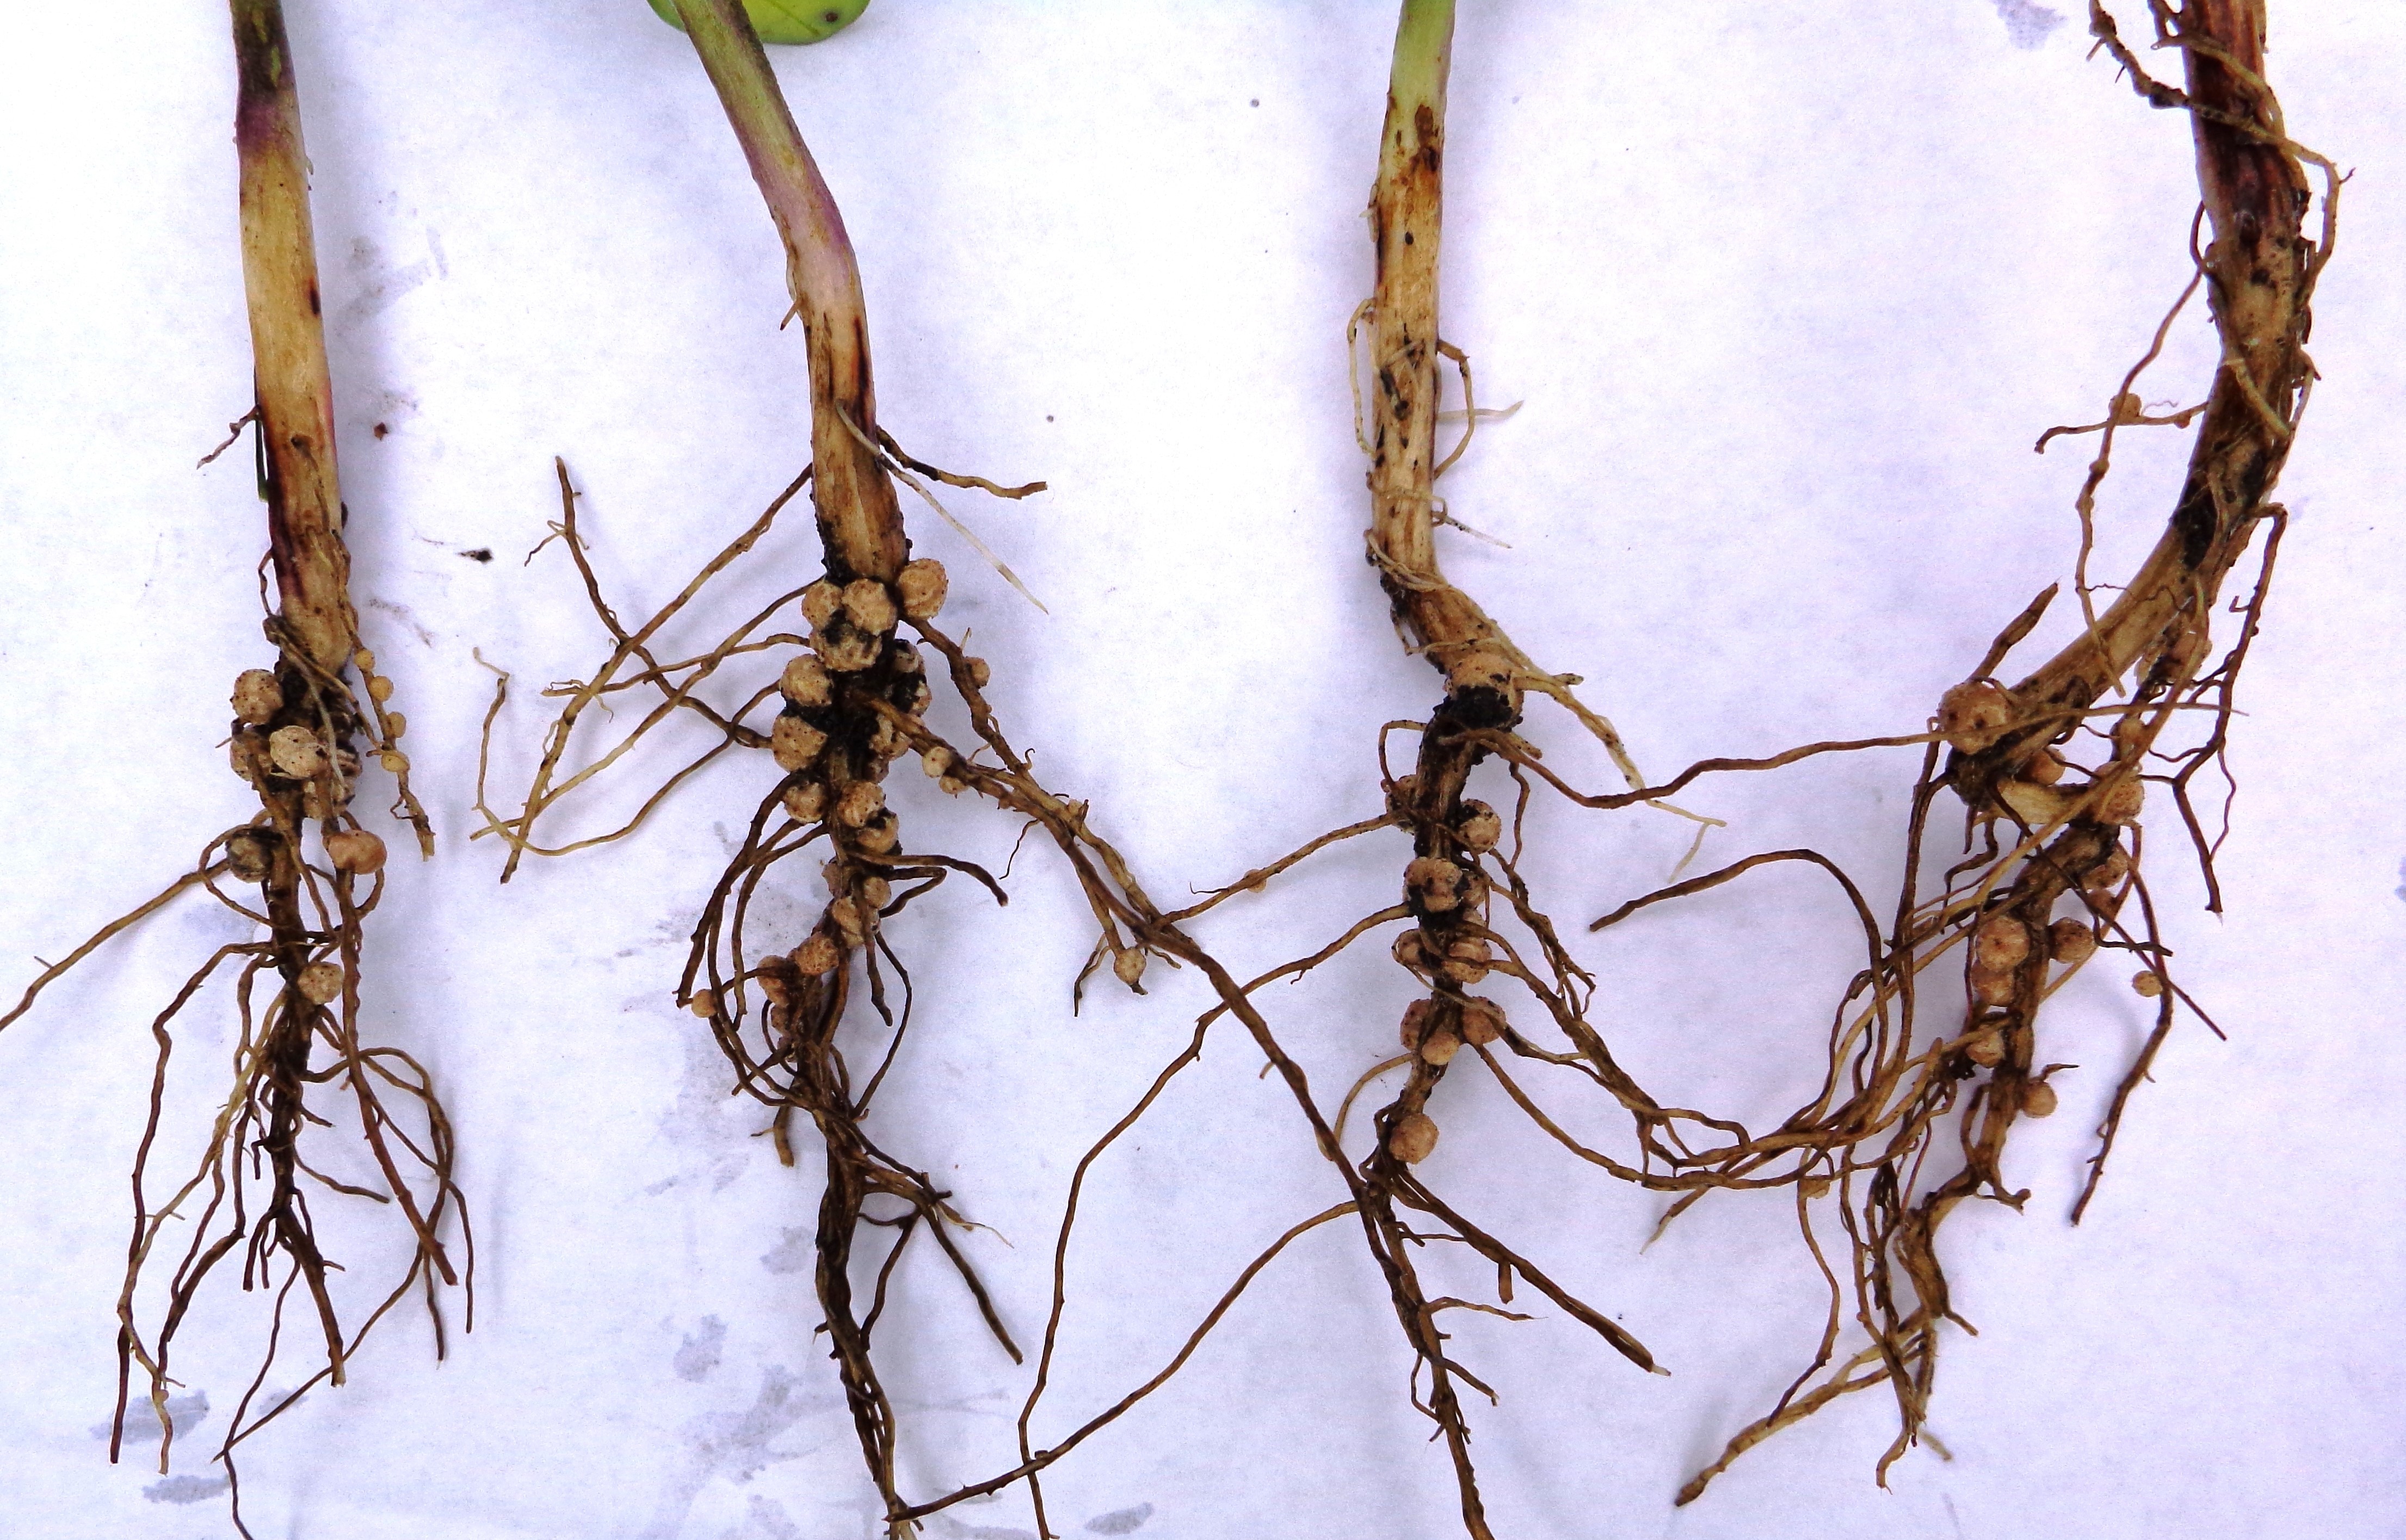 Four soybean roots with small bumps on the lower parts of the roots.